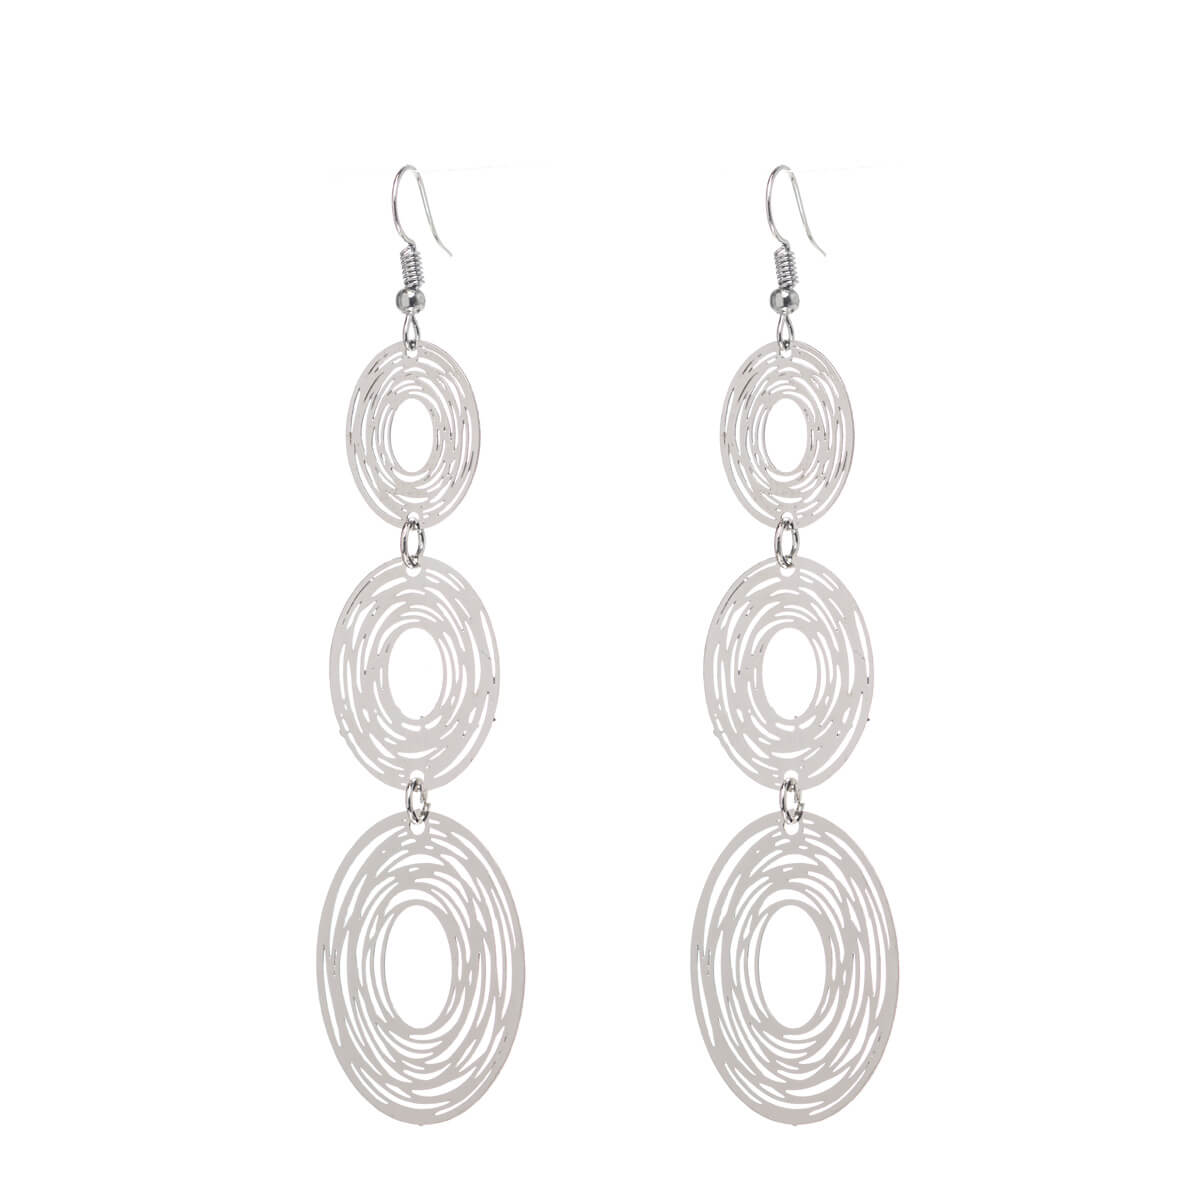 Textured hanging earrings with oval rings